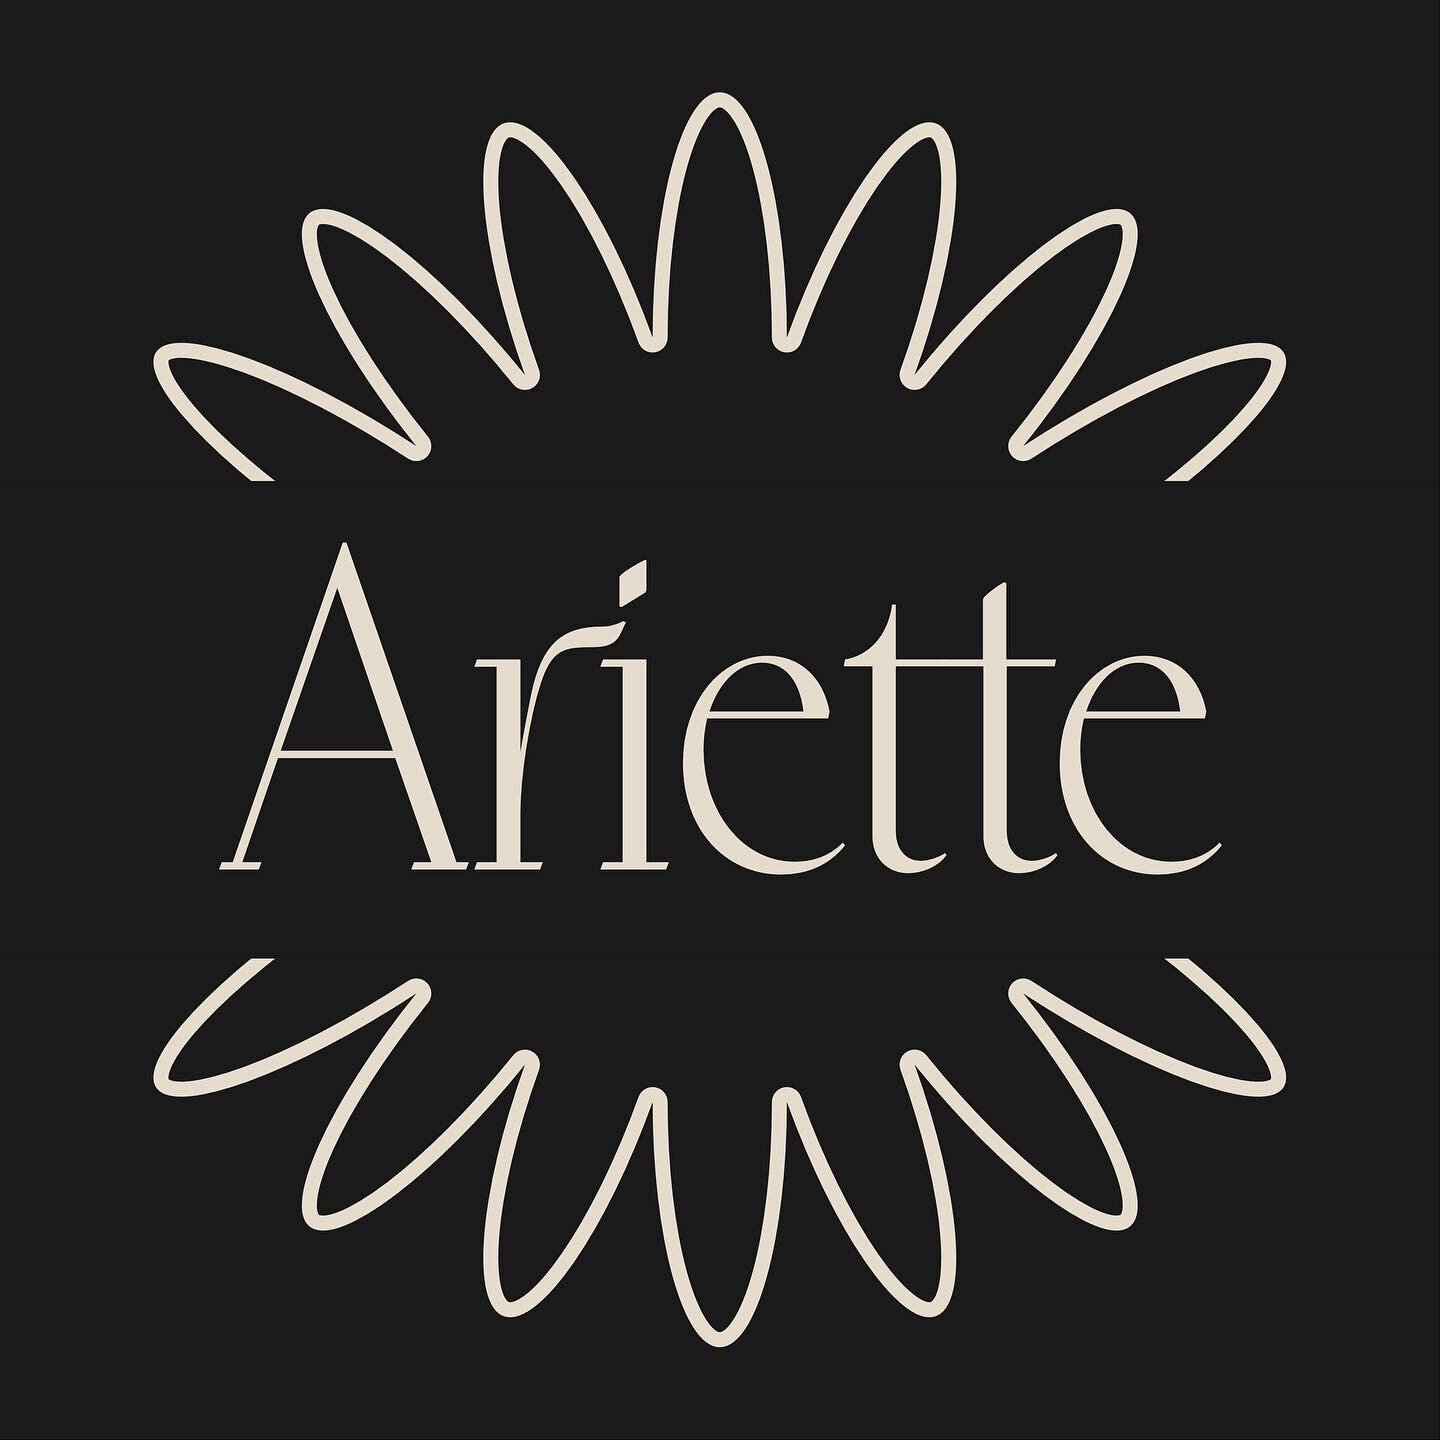 My latest typeface is now available! Ariette is a display serif rich with contextual alternates and is inspired by the lettering of architect and author, Arthur E. Burke. It's available on my website via the link in my profile. 

--------------------